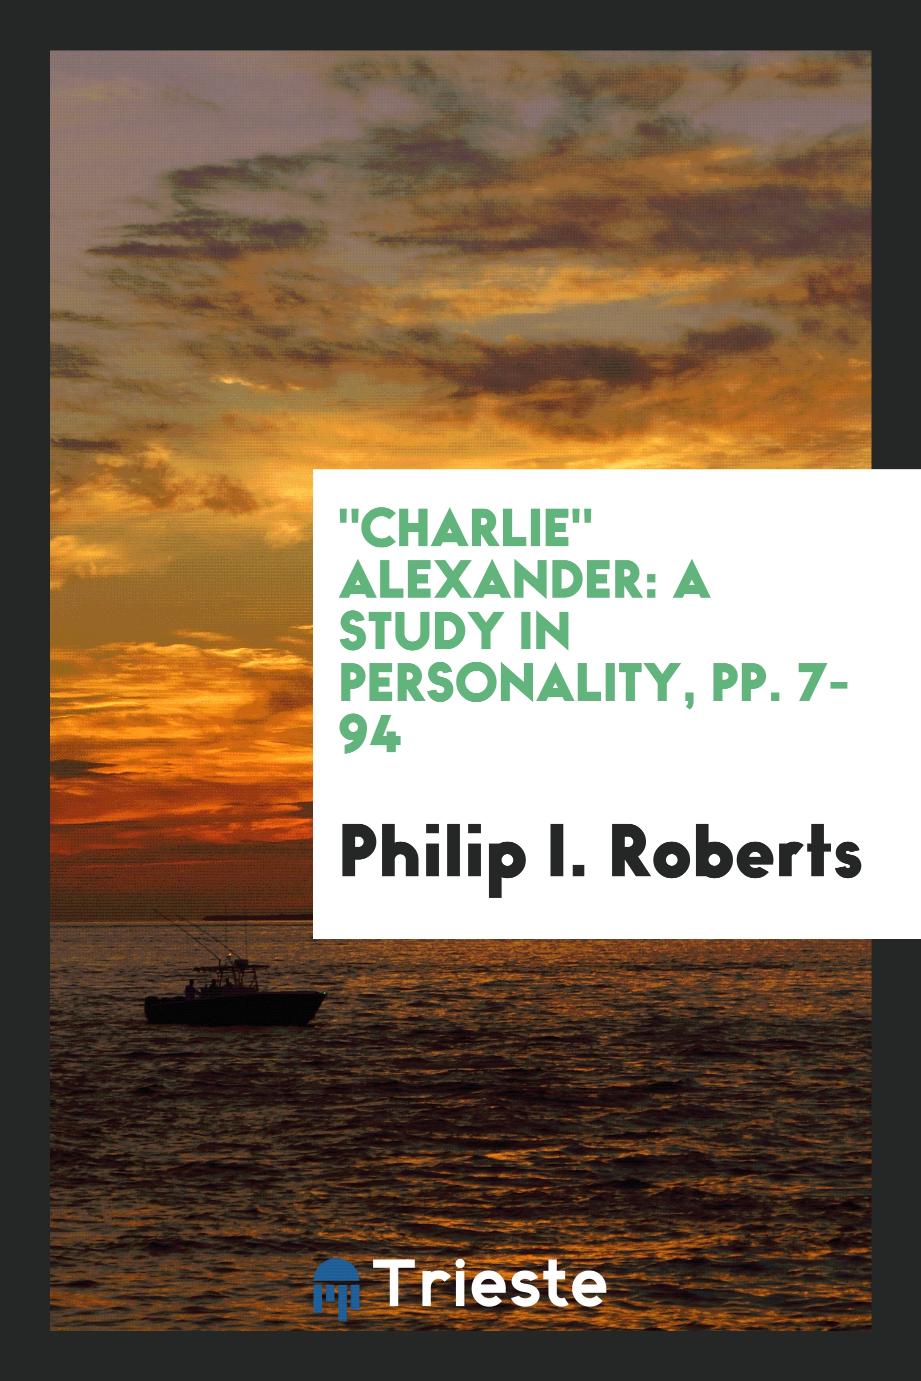 "Charlie" Alexander: A Study in Personality, pp. 7-94